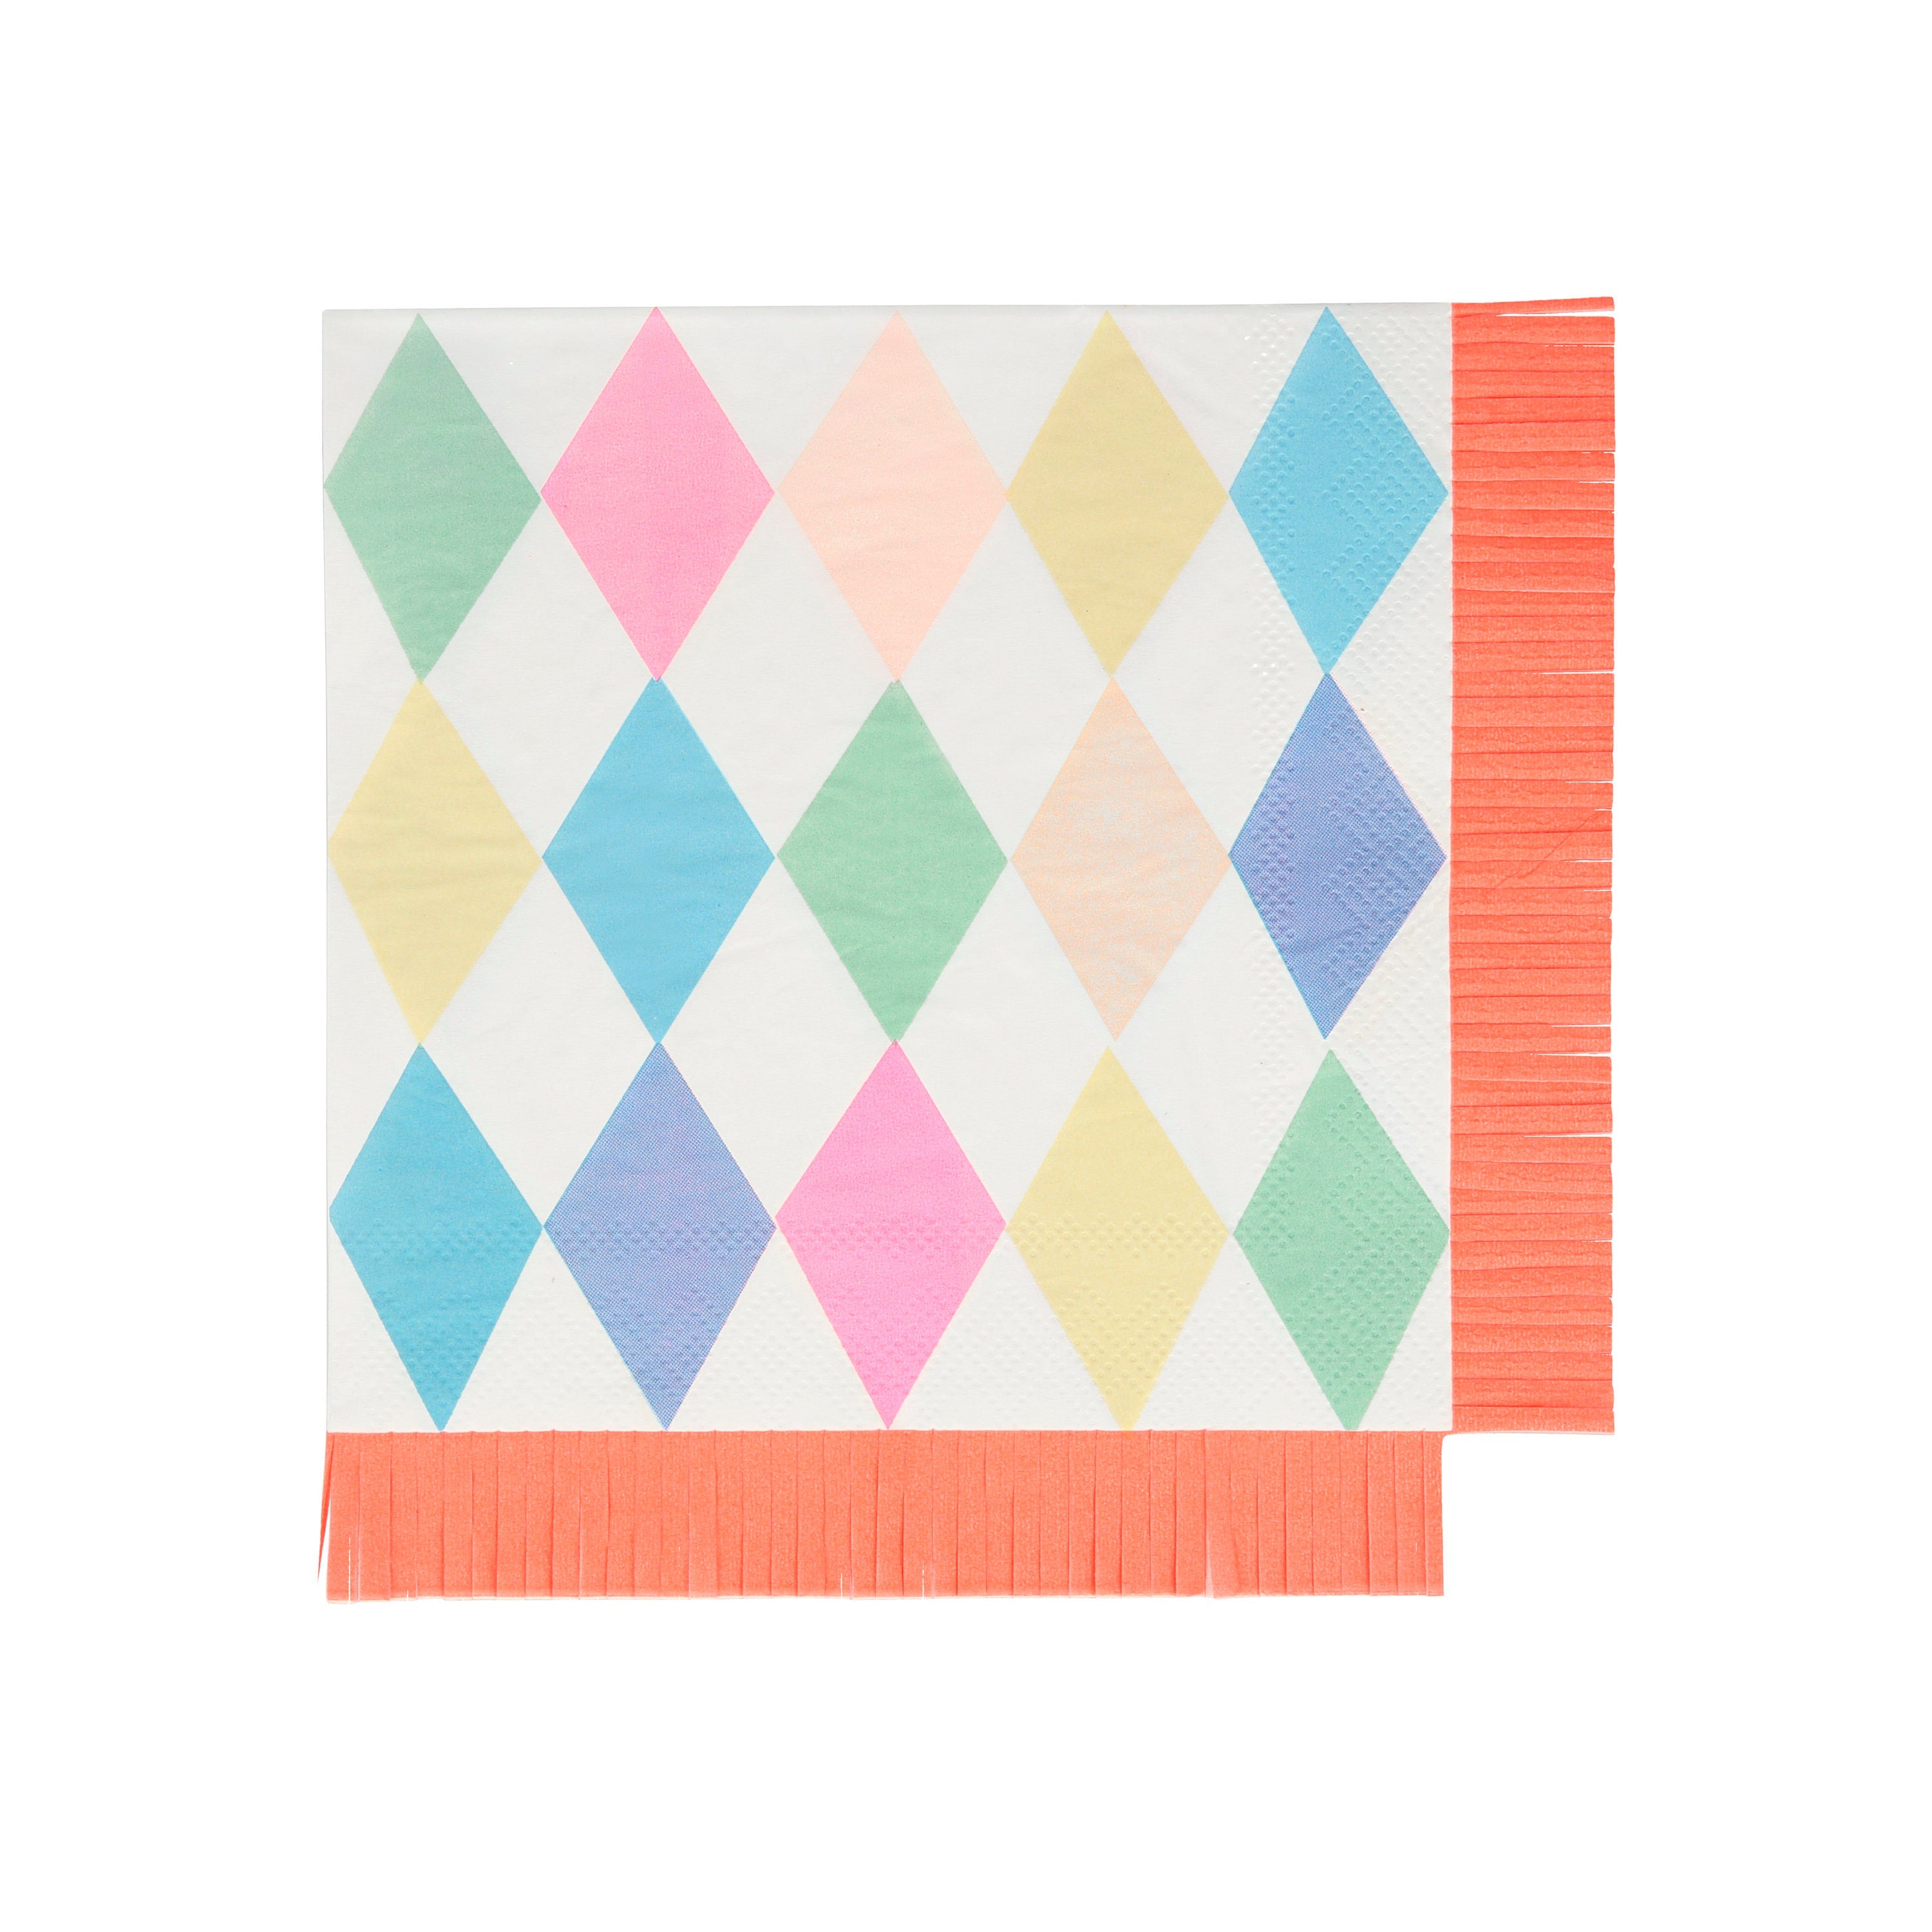 Harlequin Paper Napkins - Large Napkins | Circus Party - Circus Birthday - Fringed Napkins - Carnival Theme Party - Pastel Napkins - 20pc